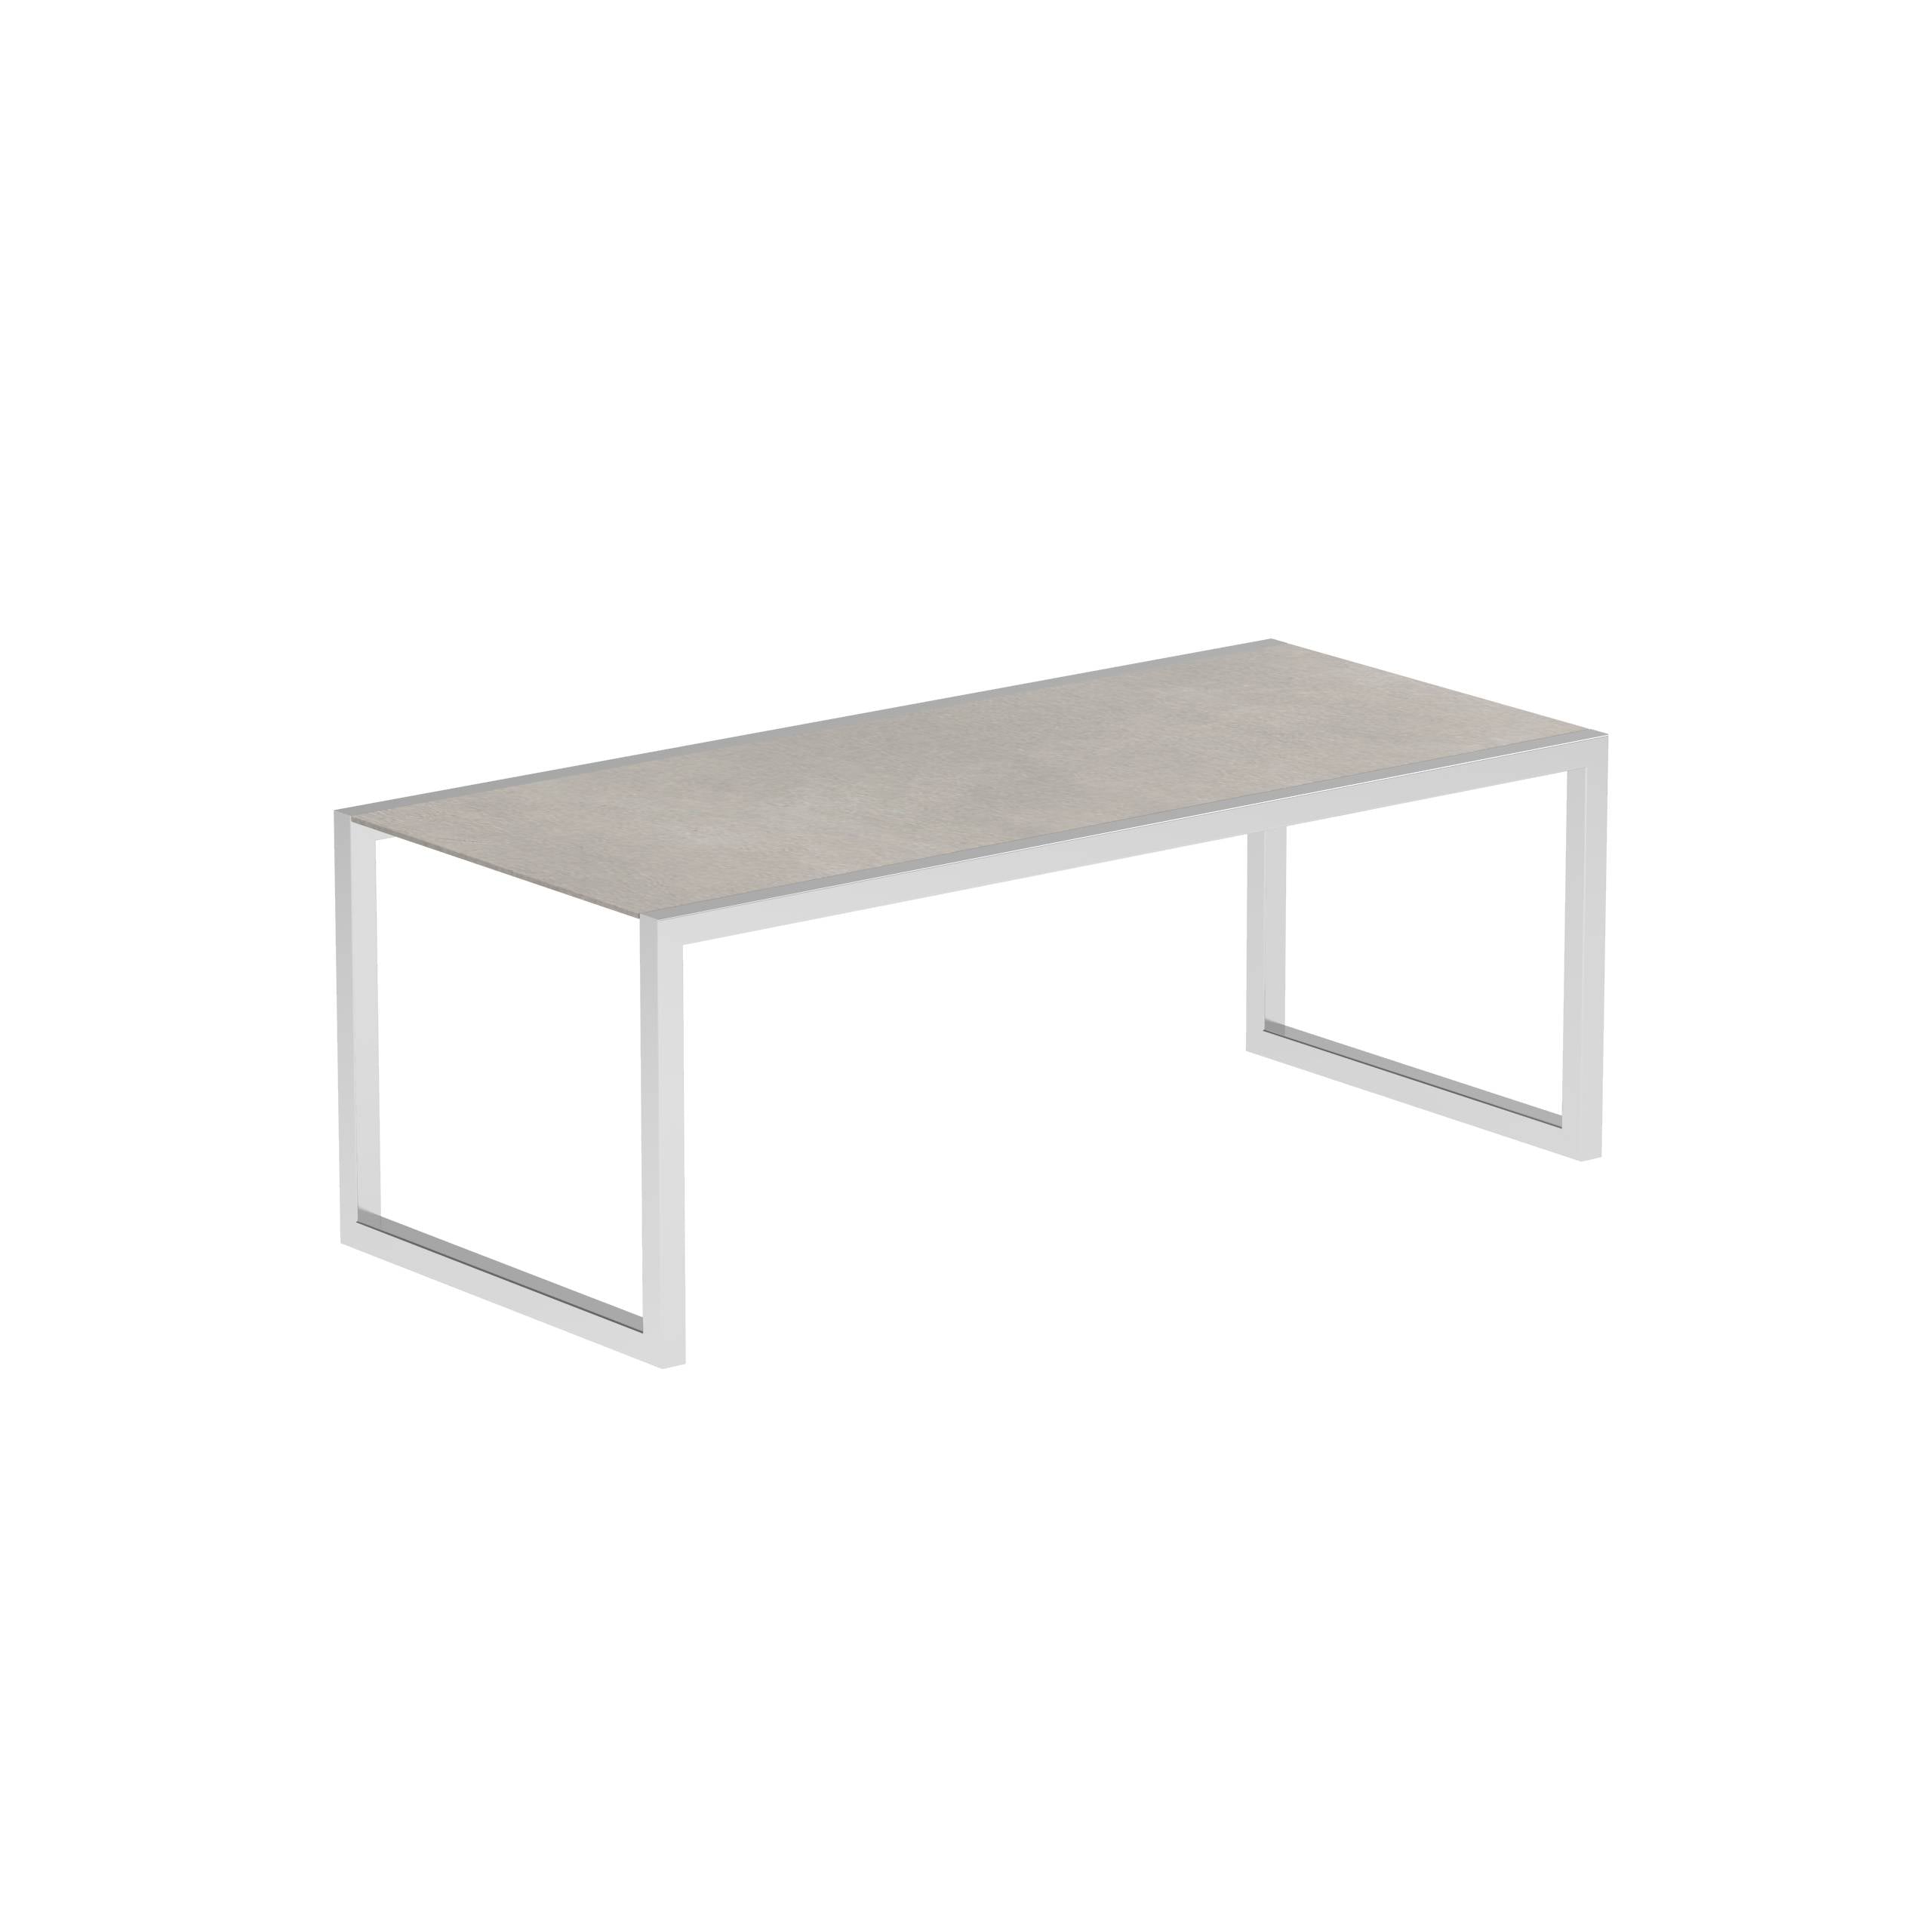 Ninix Table 200x90cm With Stainless Steel El.Pol. And Ceramic Cemento Luminoso